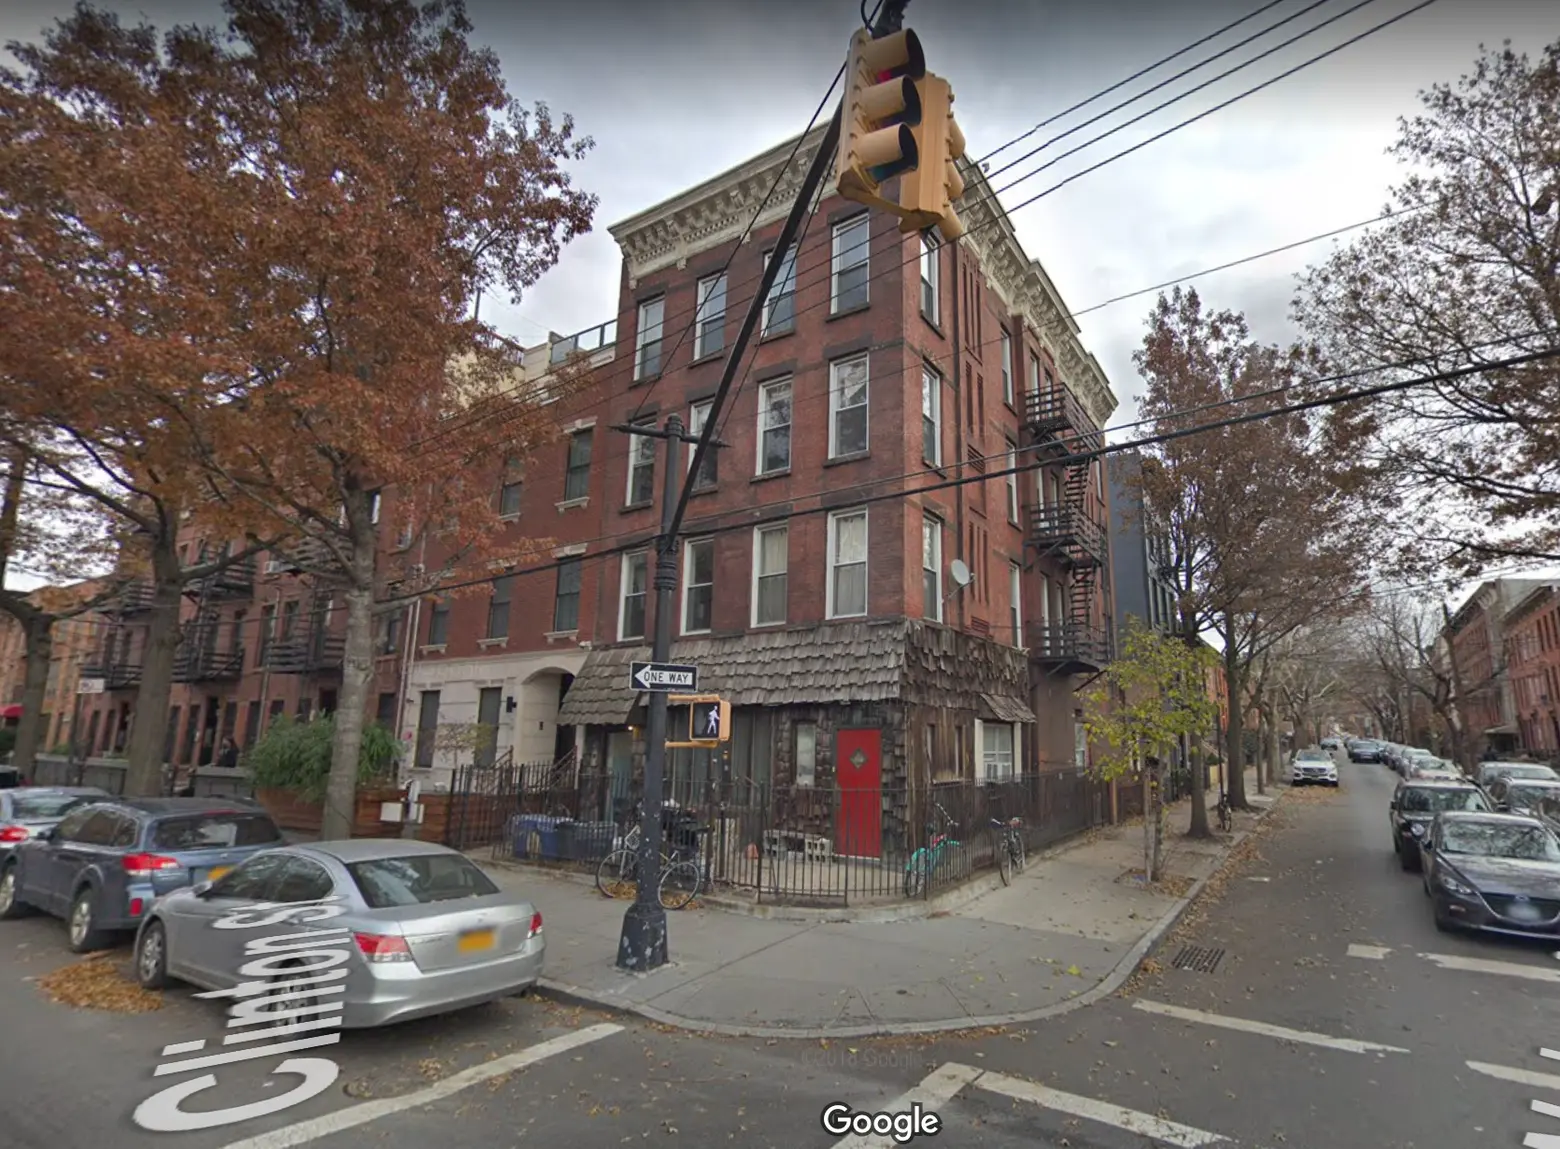 NYC lawyers once gifted Adolf Hitler and Joseph Stalin a tenement in Brooklyn